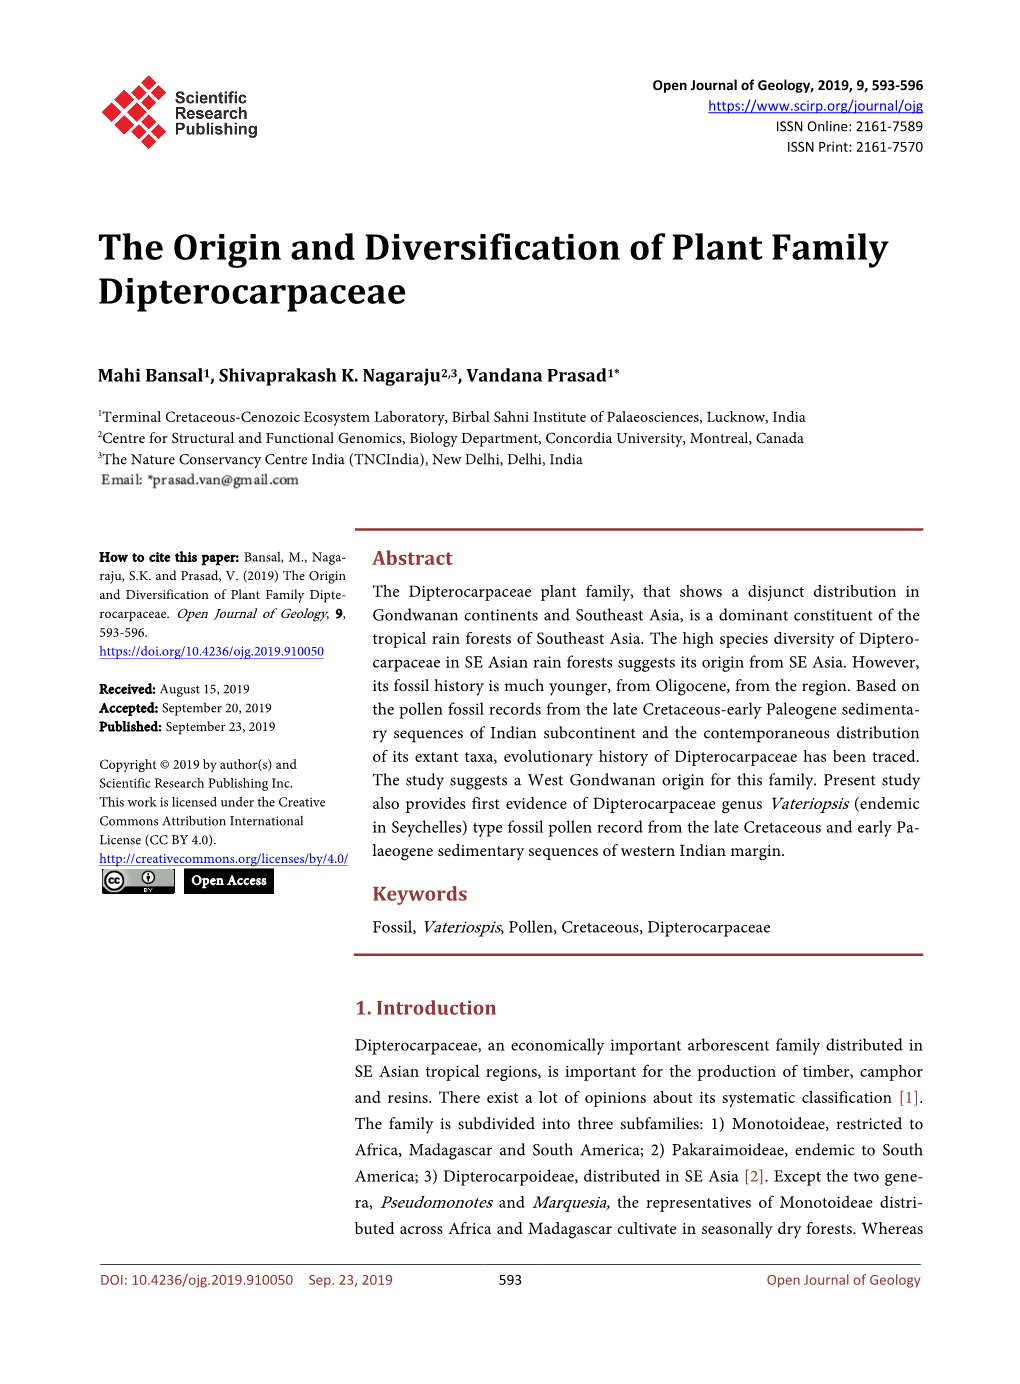 The Origin and Diversification of Plant Family Dipterocarpaceae